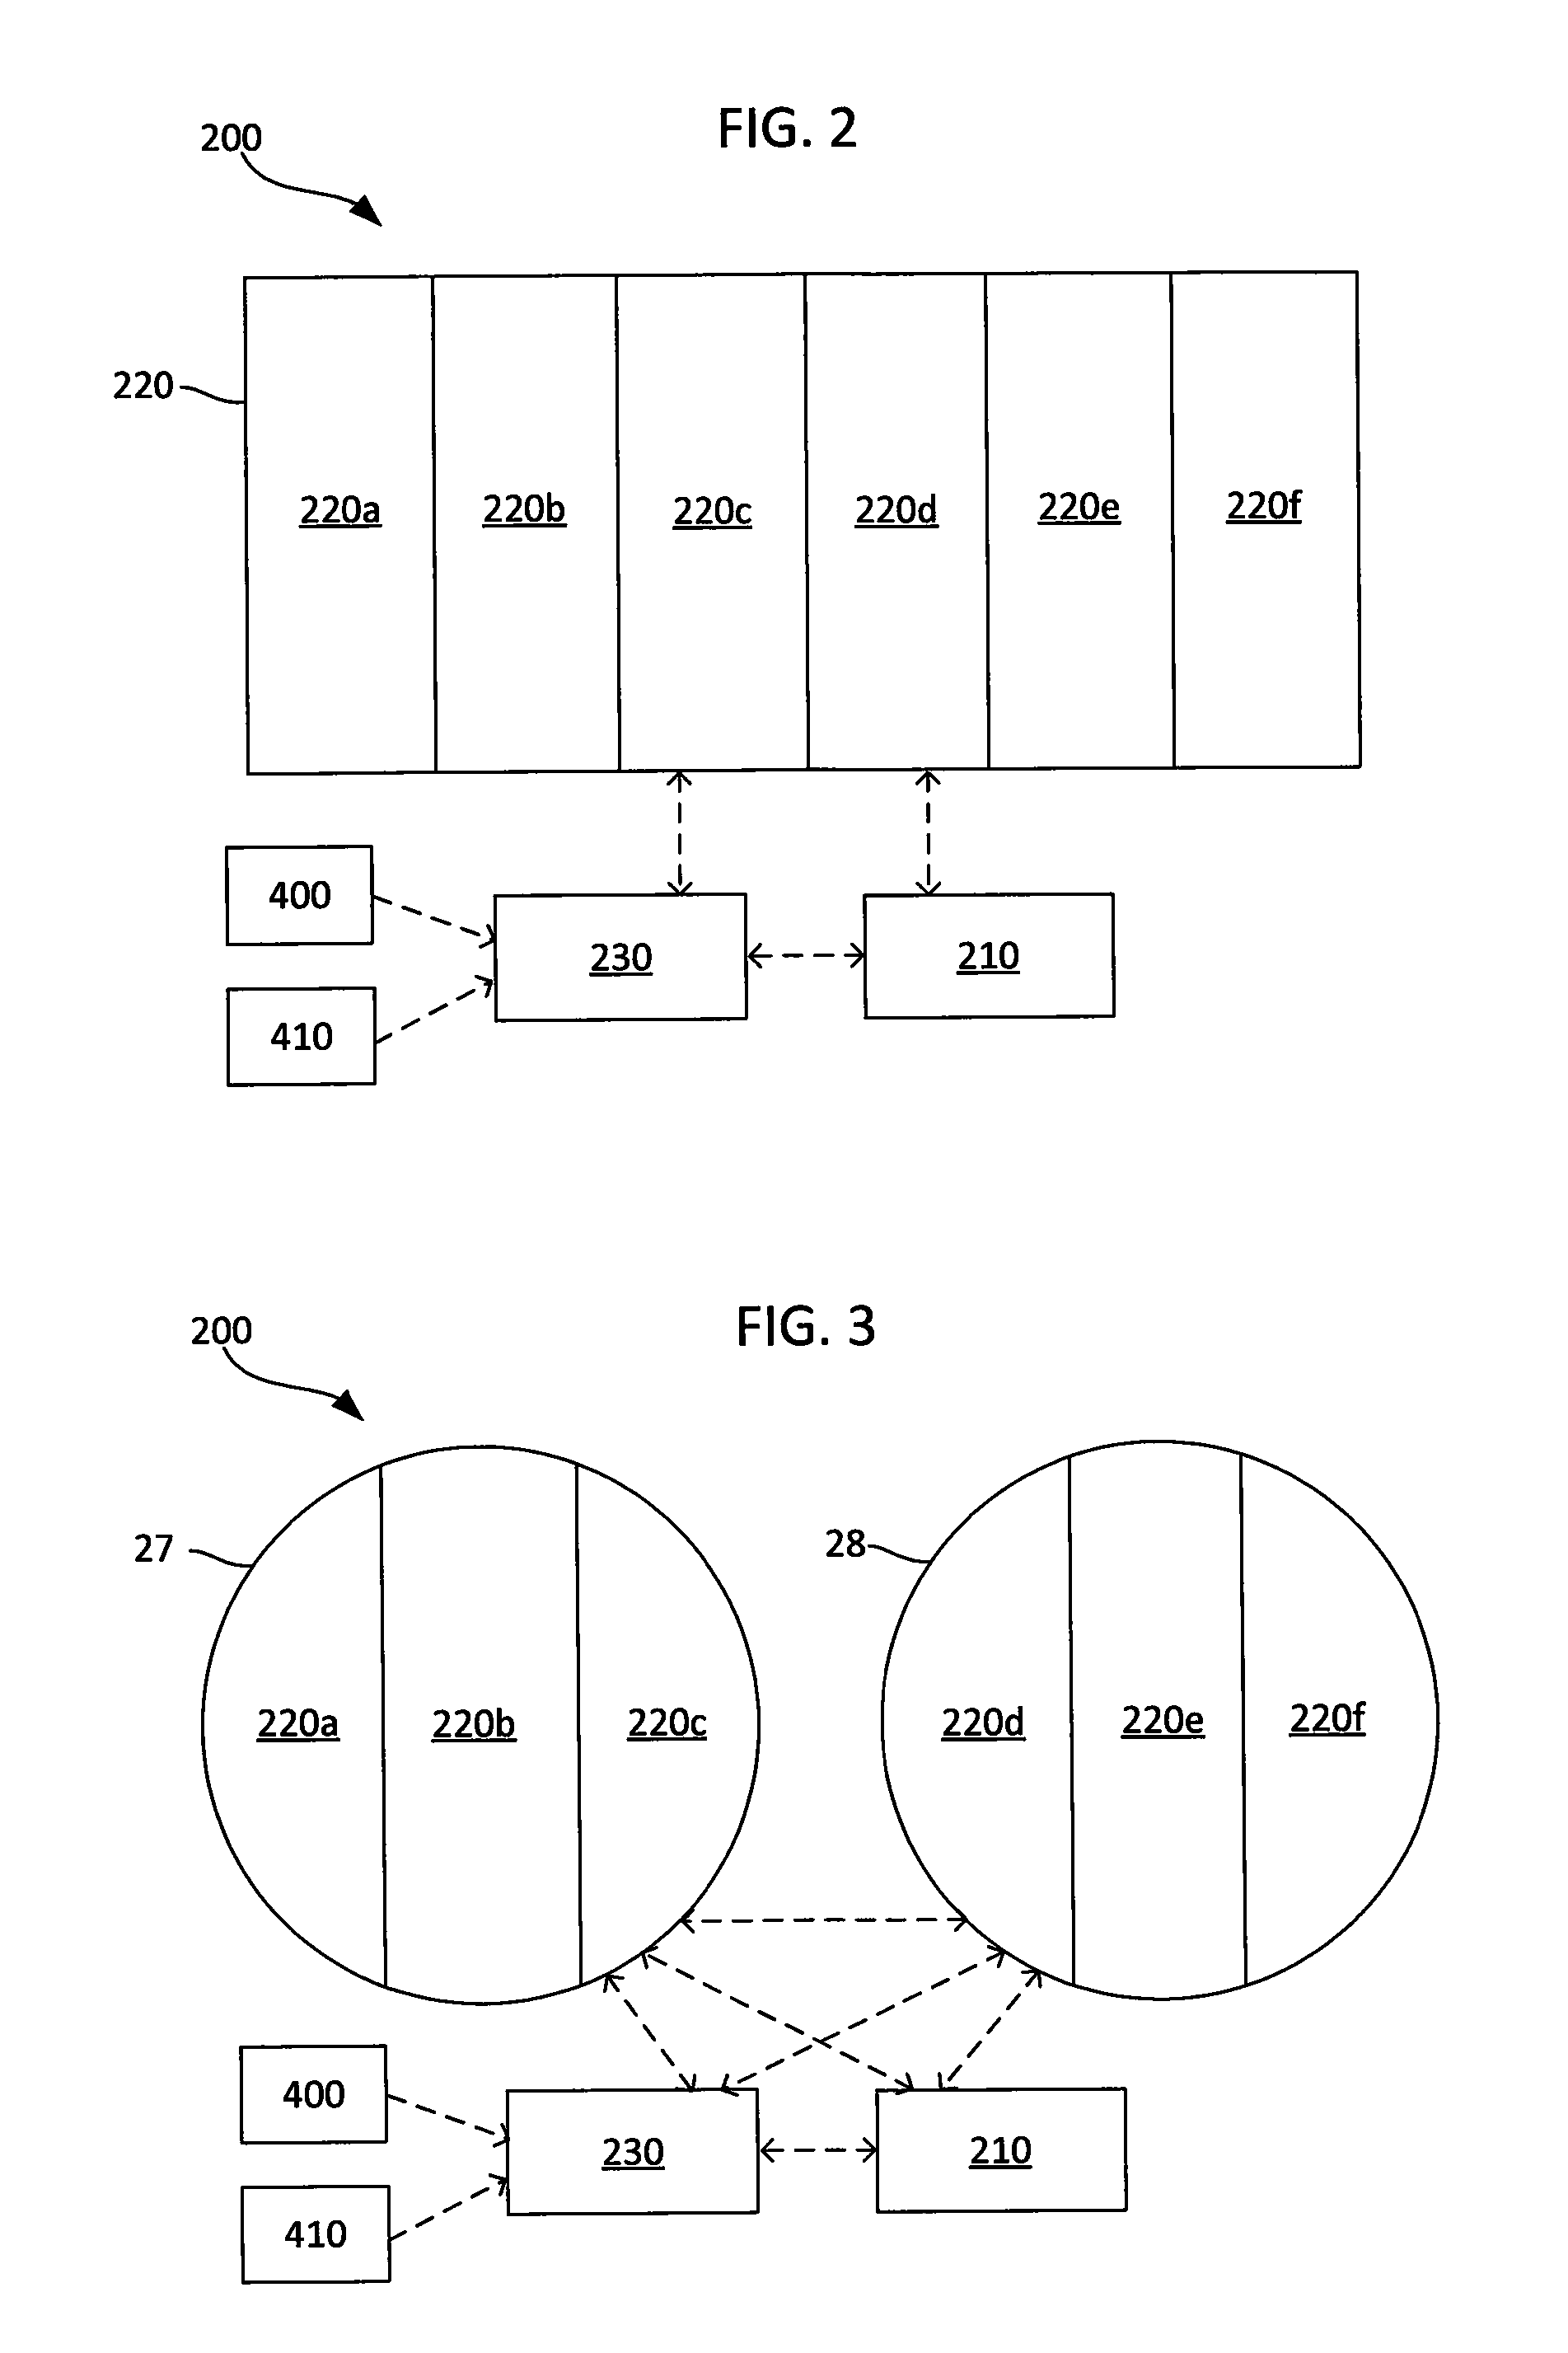 Method and system for reducing motion blur when experiencing virtual or augmented reality environments